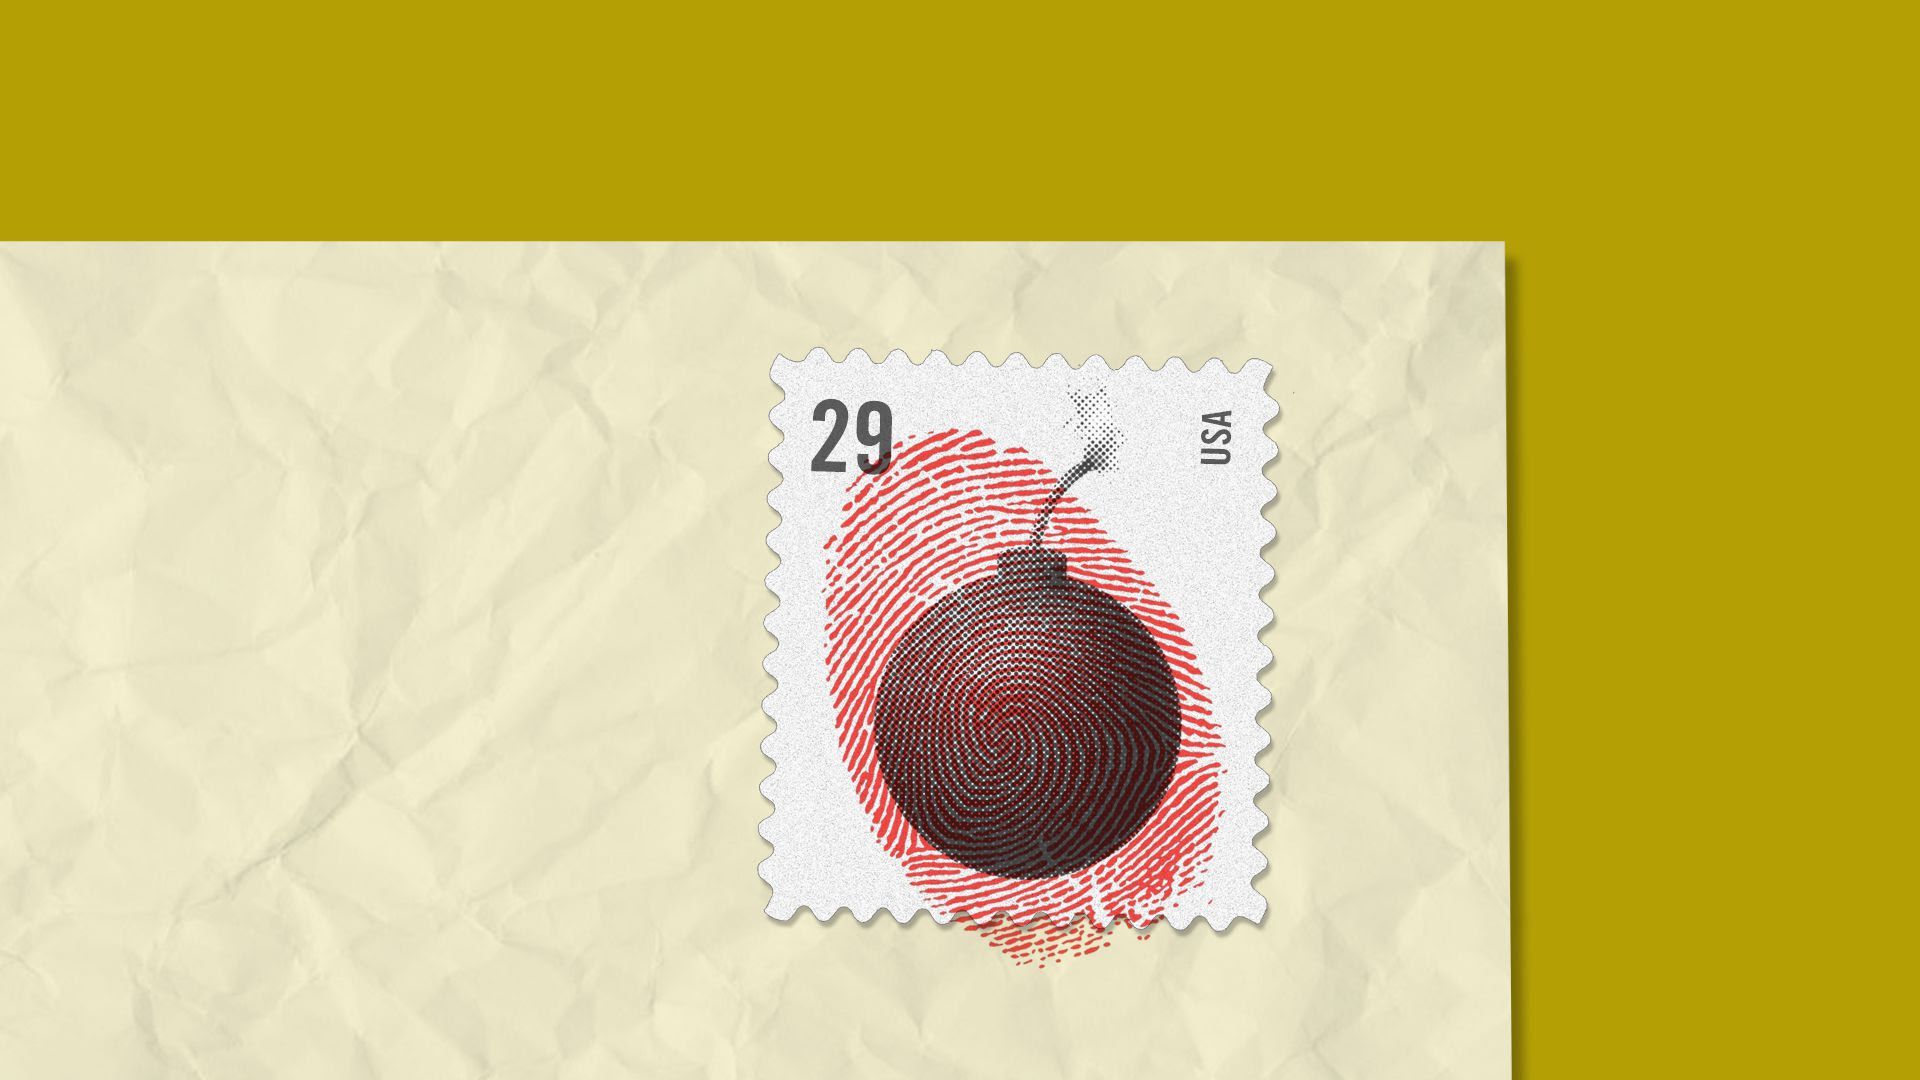 An illustration of a bomb on a stamp with a red fingerprint over it 